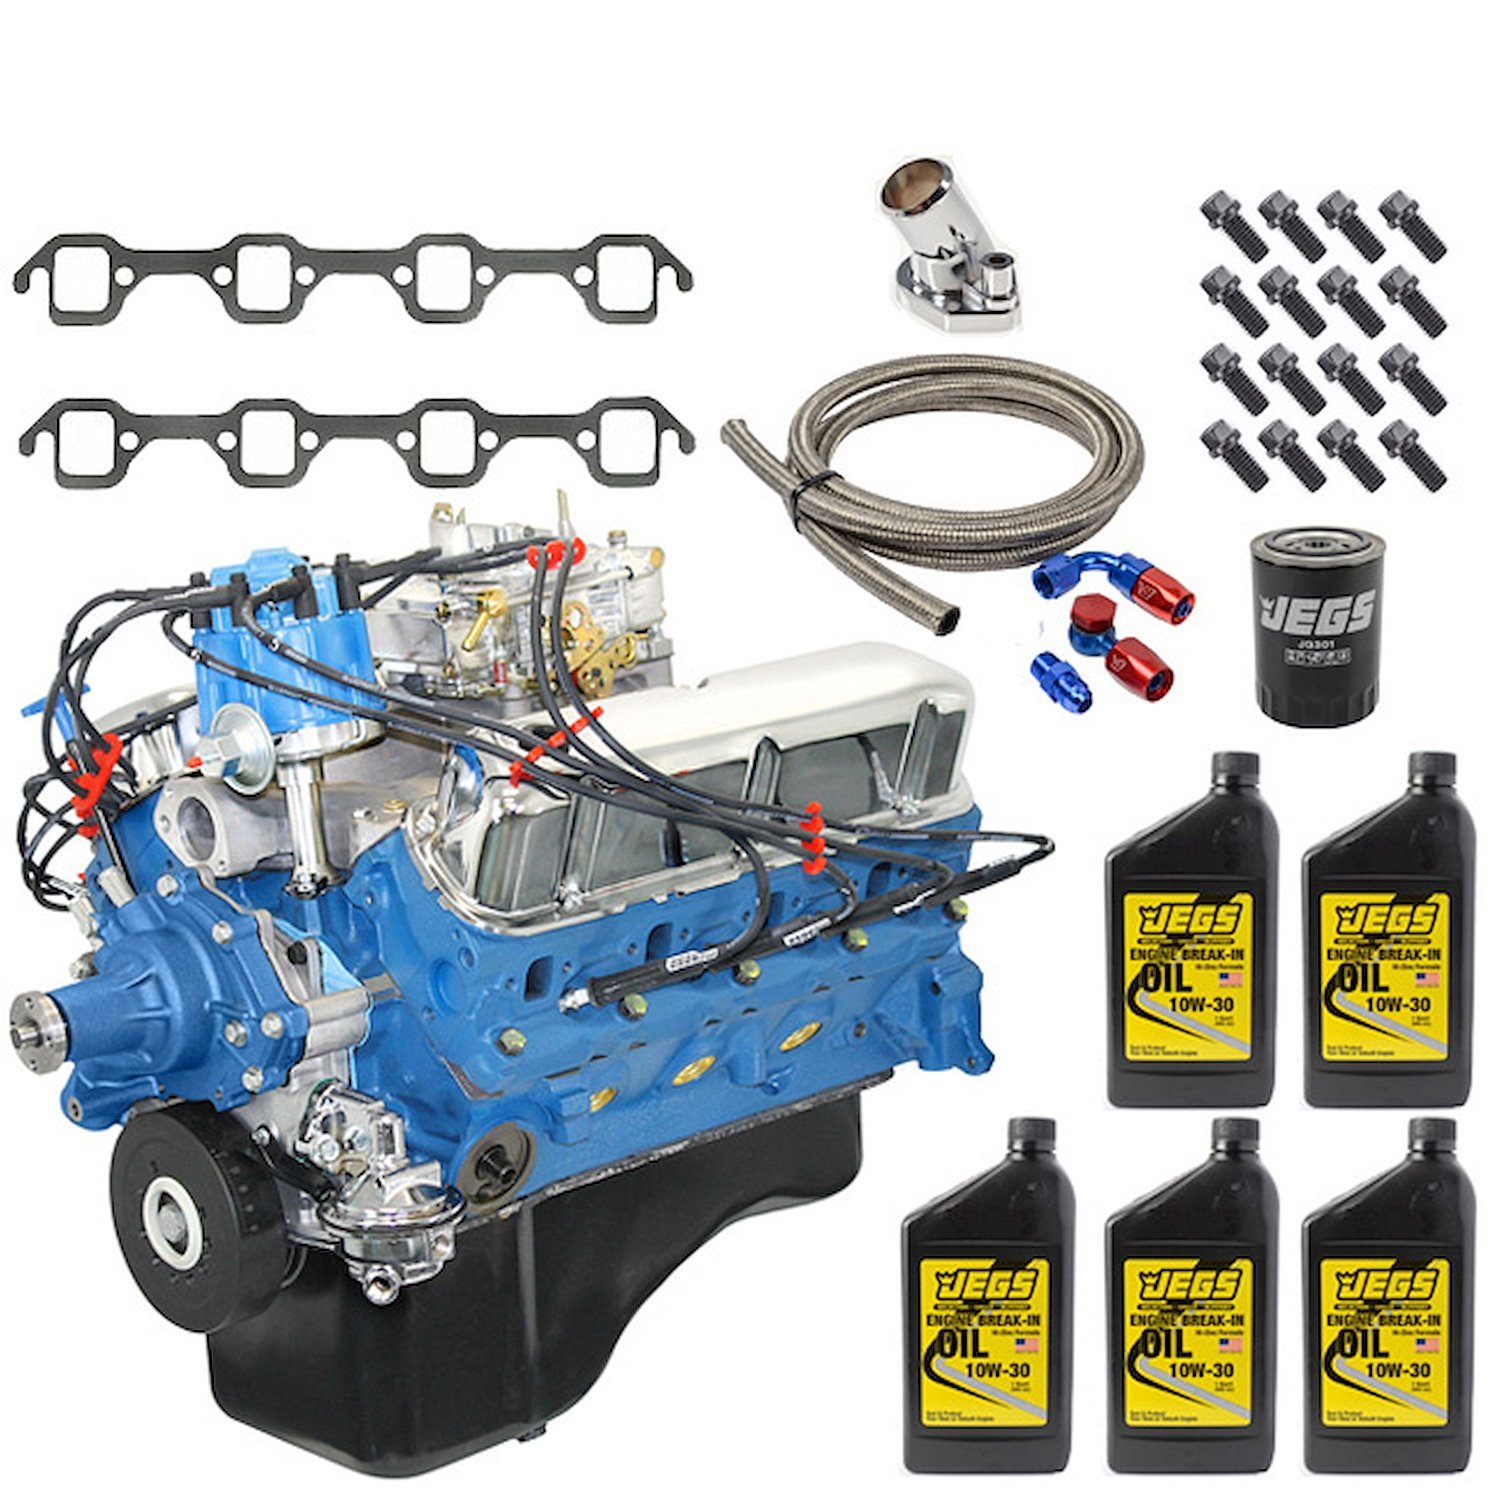 Ford Small Block 302ci Crate Engine with Dress Kit